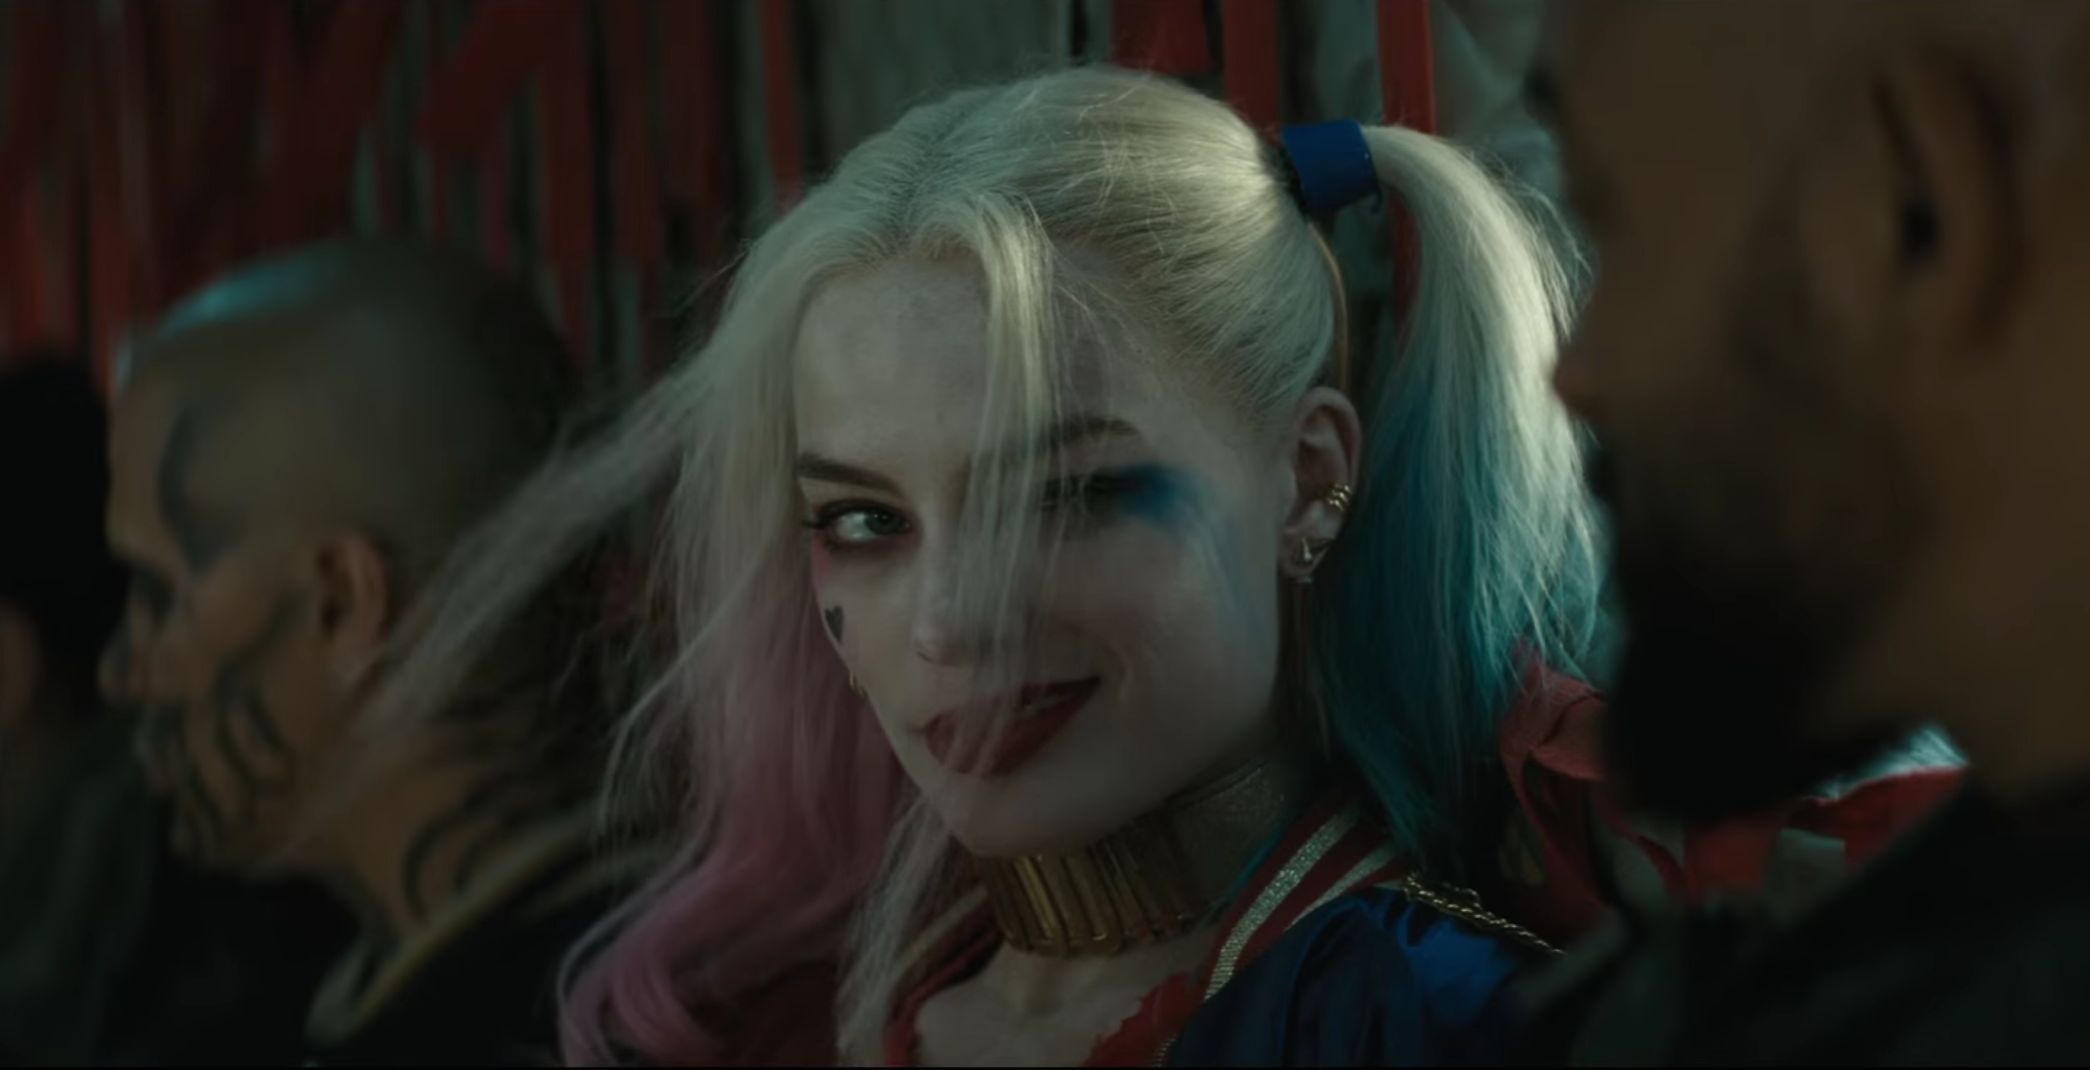 harley quinn, movie, suicide squad, margot robbie, two toned hair, wink HD wallpaper